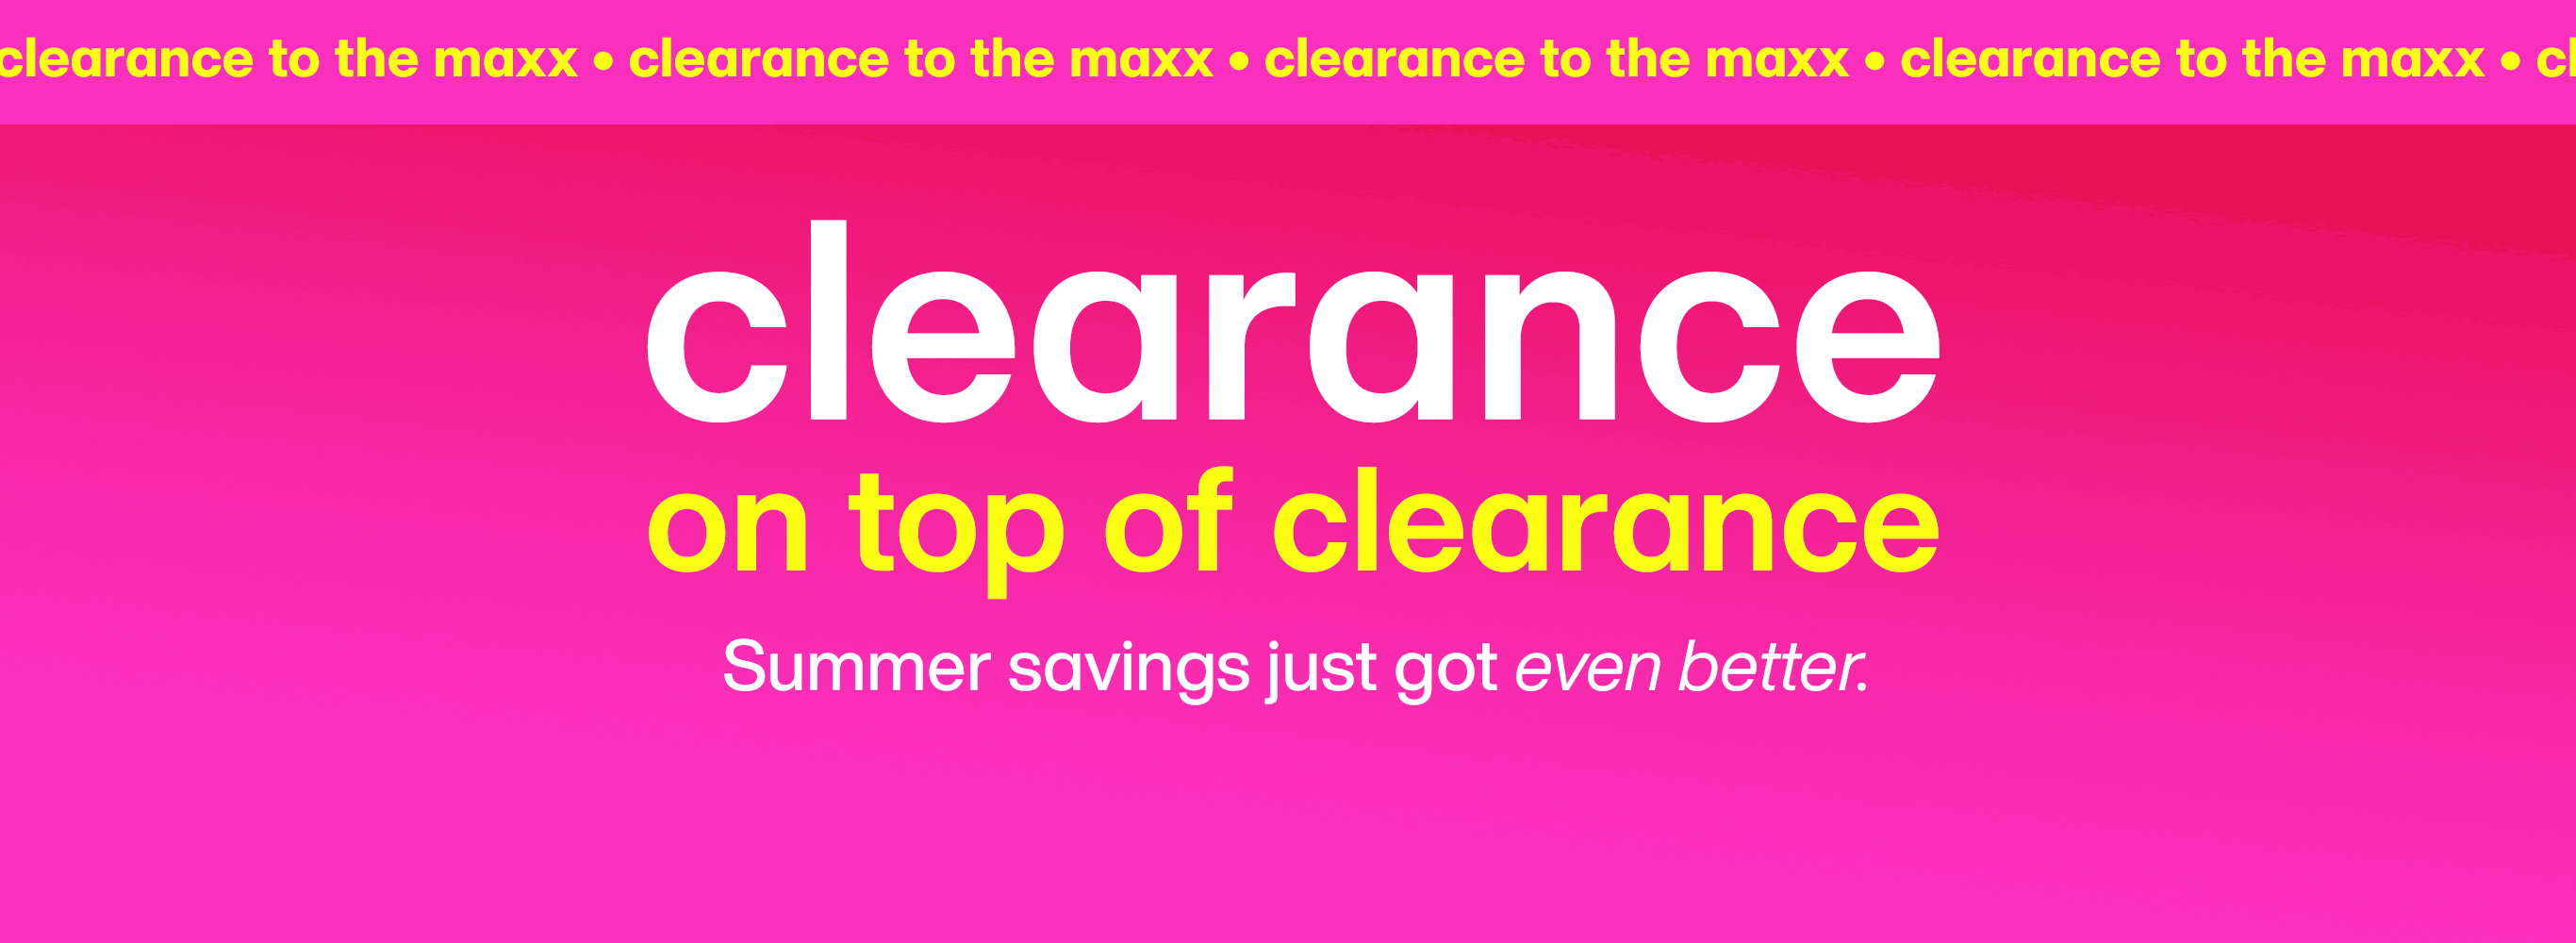 Clearance to the maxx. Clearance on top of clearance. Summer savings just got even better.